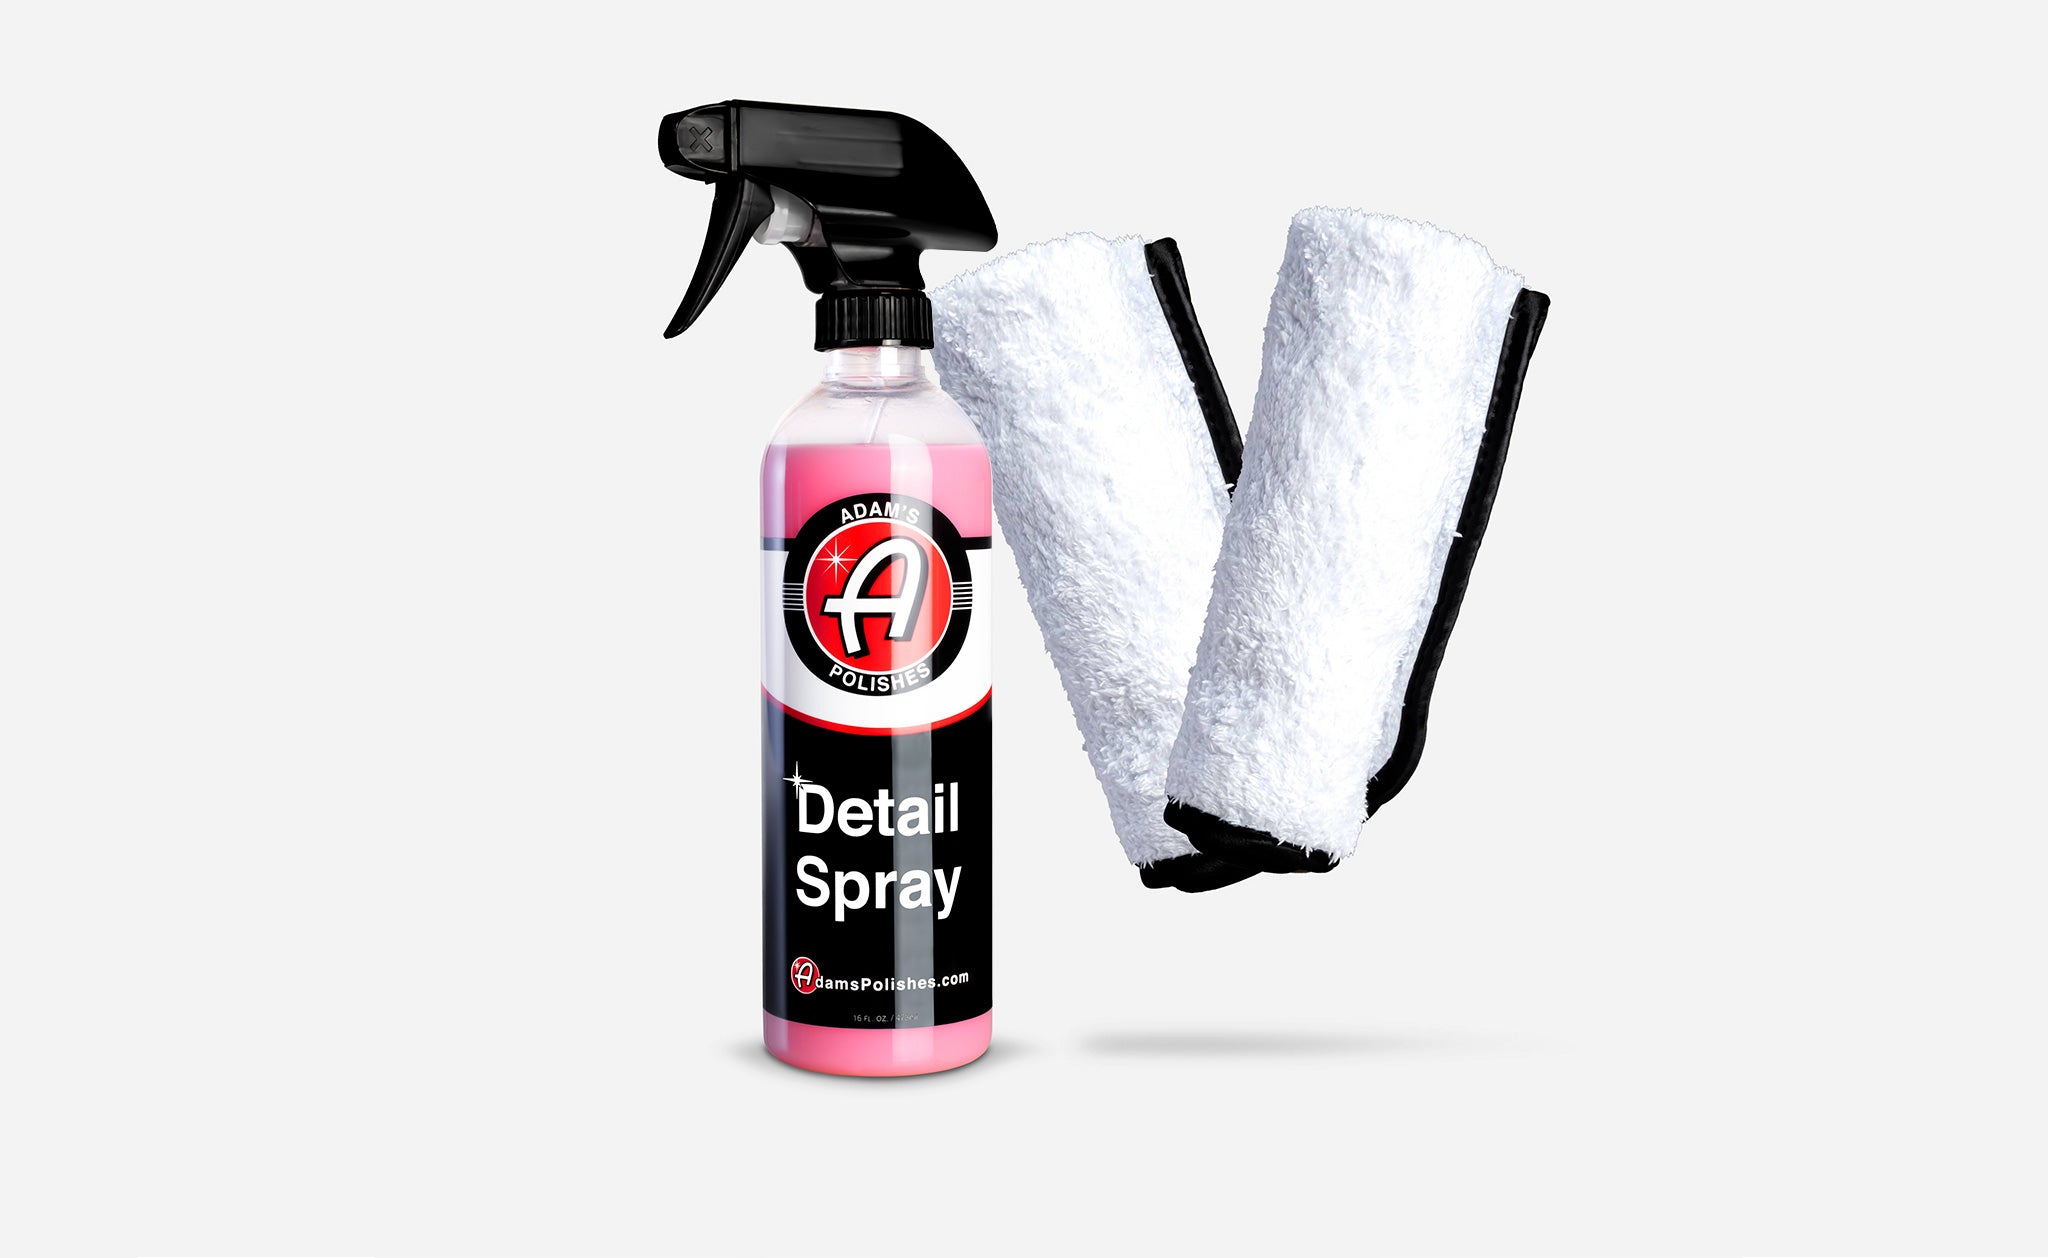 Is Graphene Detail Spray Ceramic Infused like CS3? - General Detailing  Discussion and Questions - Adams Forums